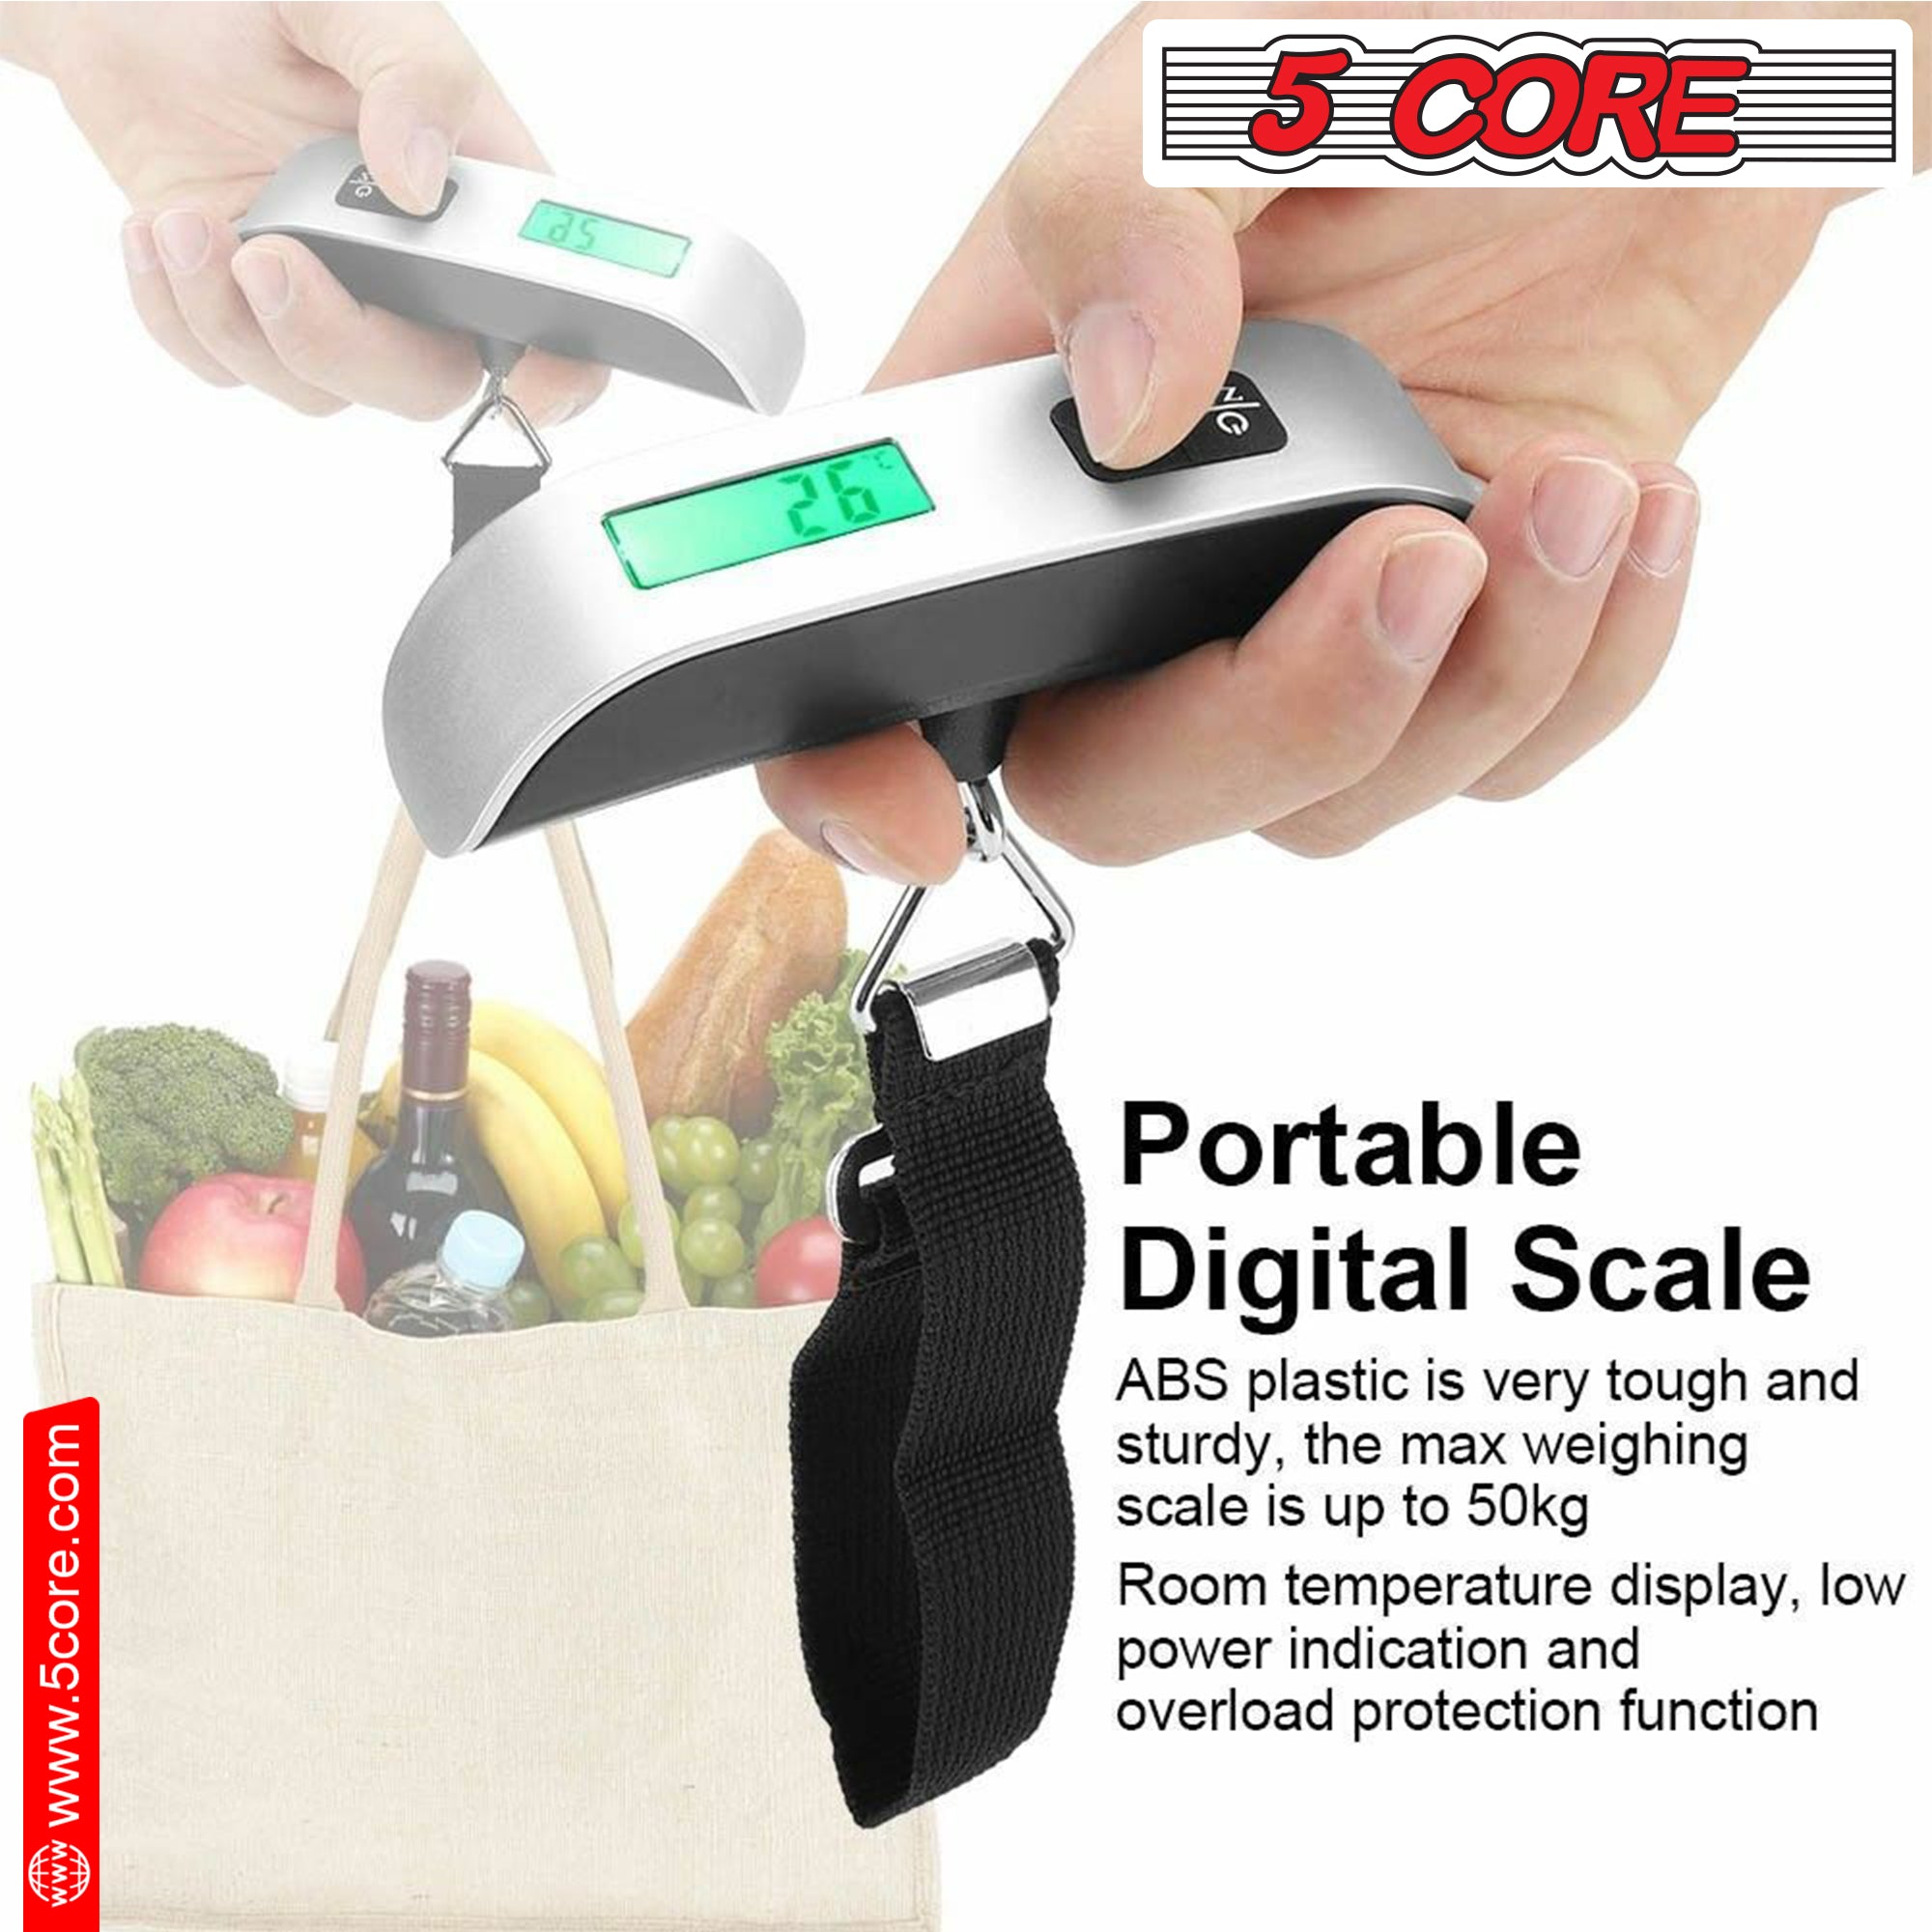 Luggage Scale Handheld Portable Electronic Digital Hanging Bag Weight  Scales Travel 110 LBS 50 KG 5 Core LSS-005 (1 Piece)